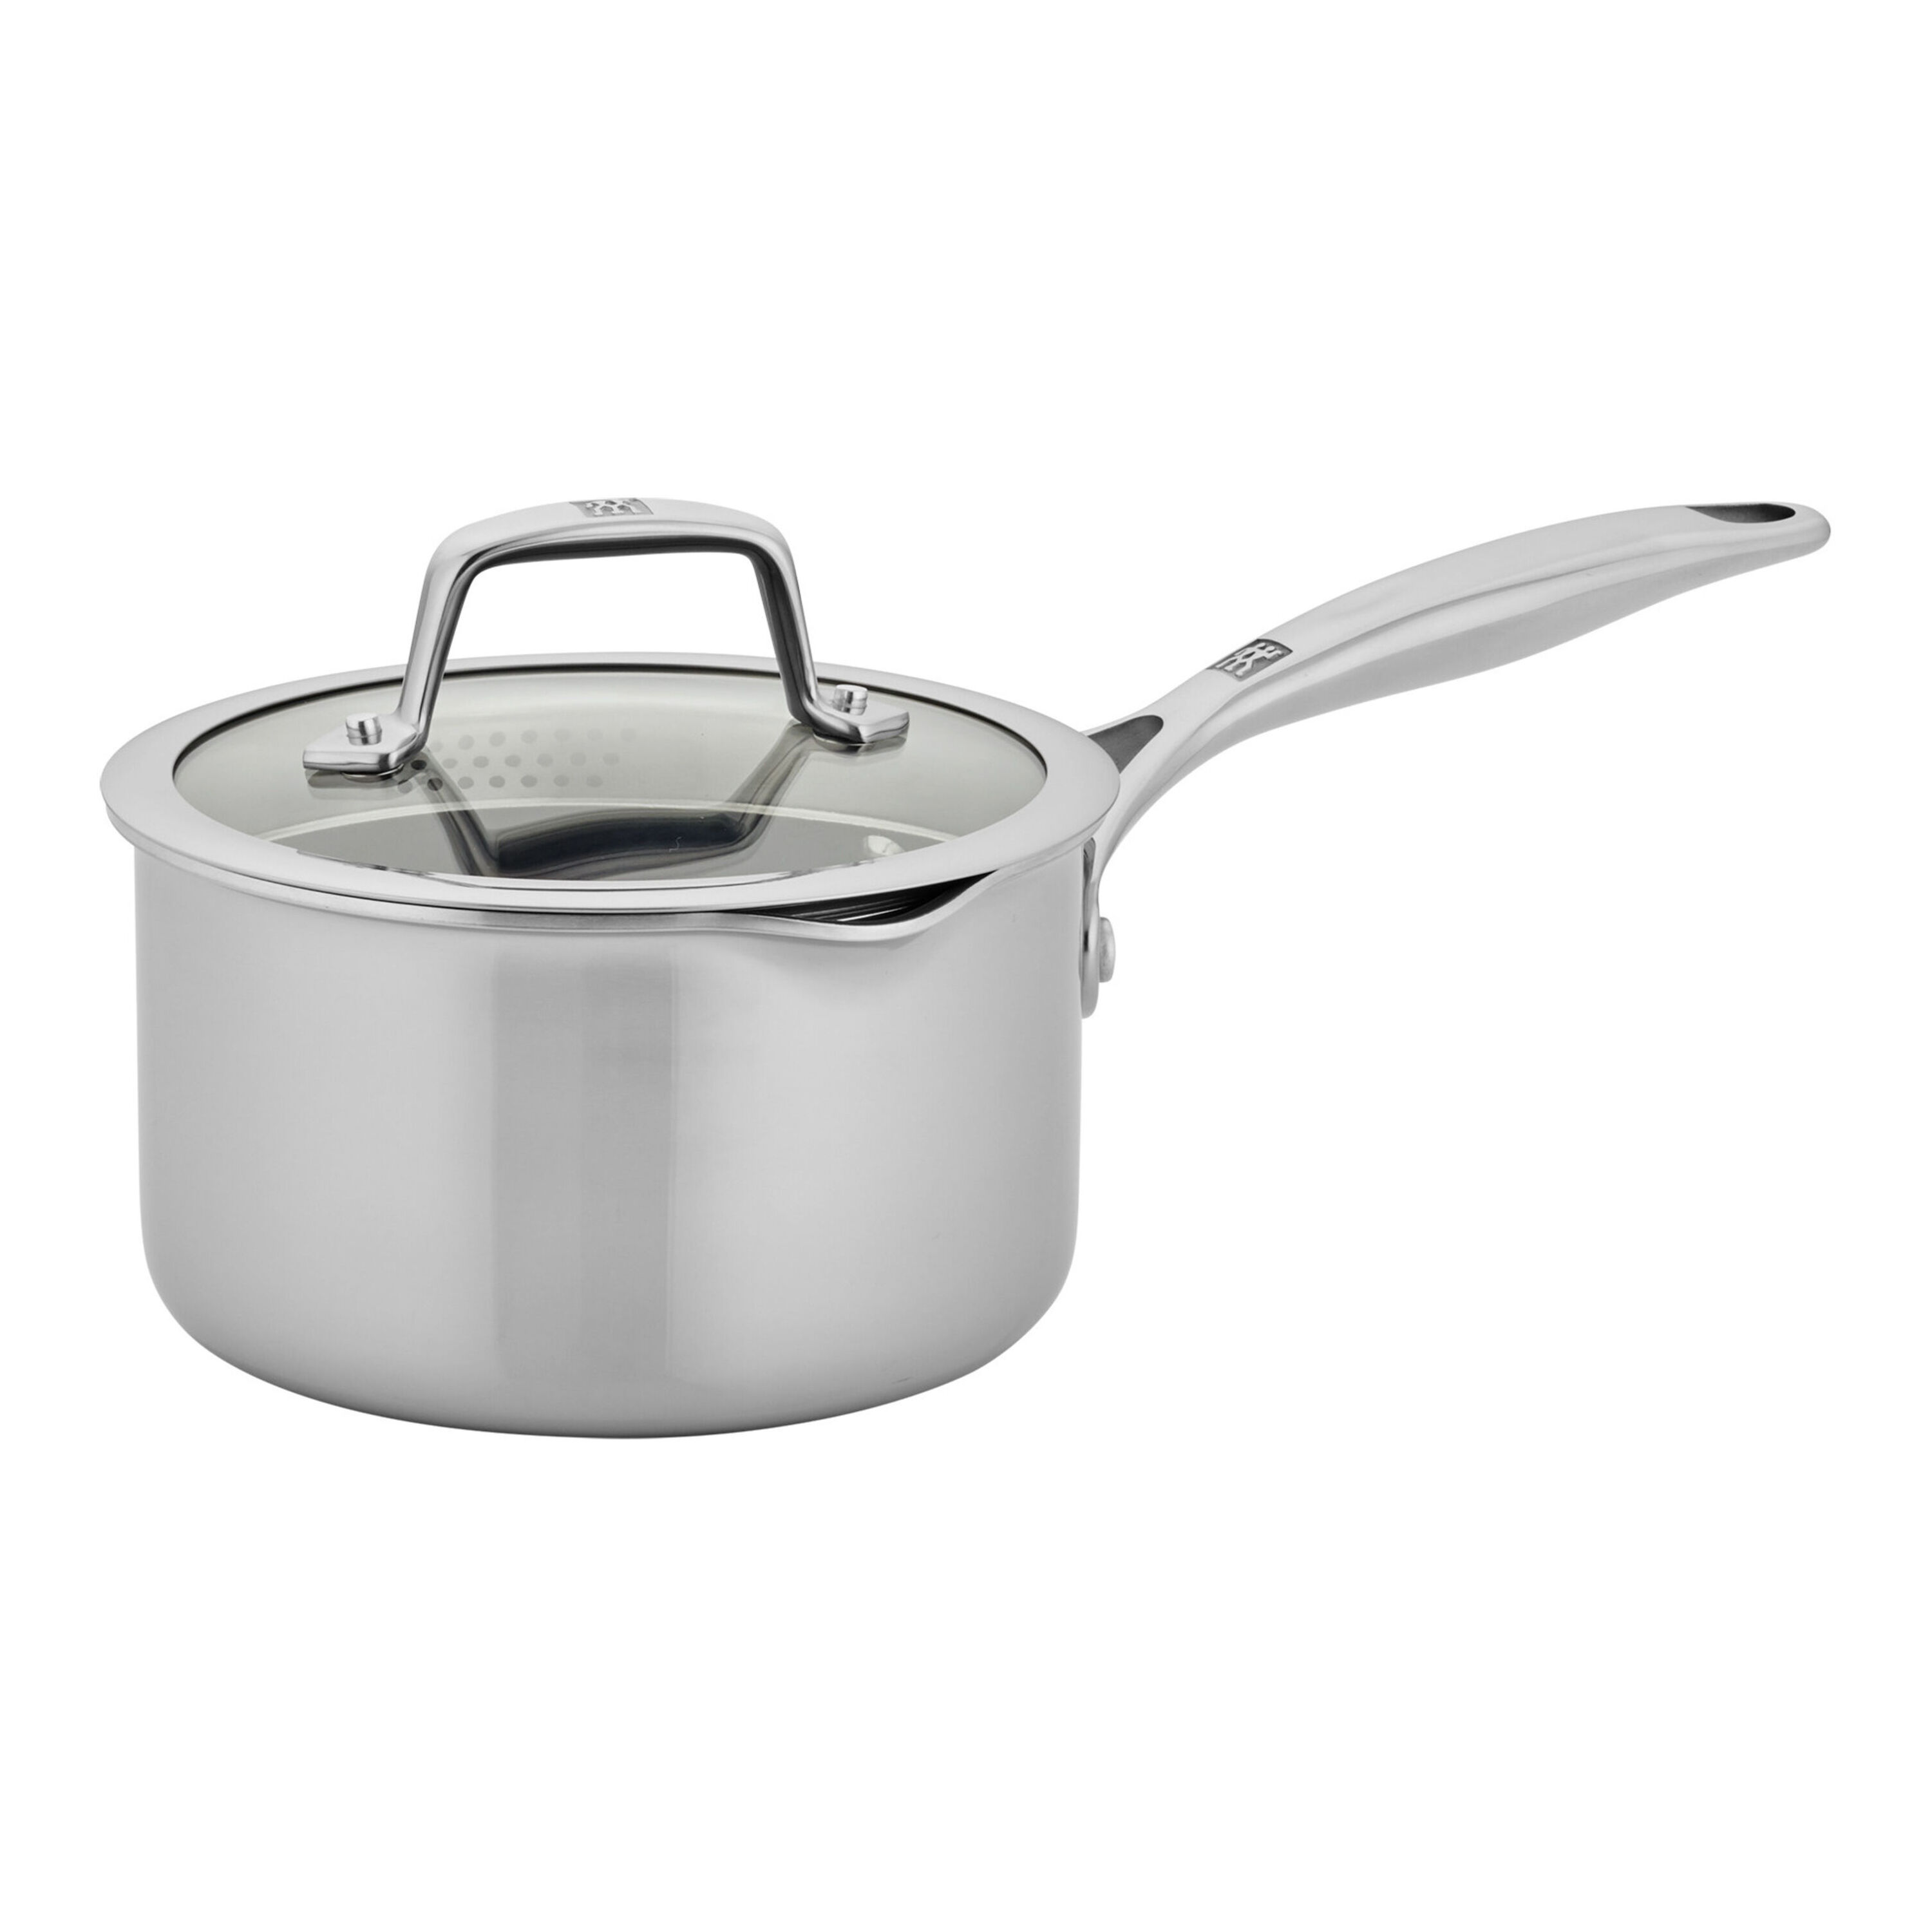 ZWILLING Energy Plus 2 qt Sauce pan, 18/10 Stainless Steel